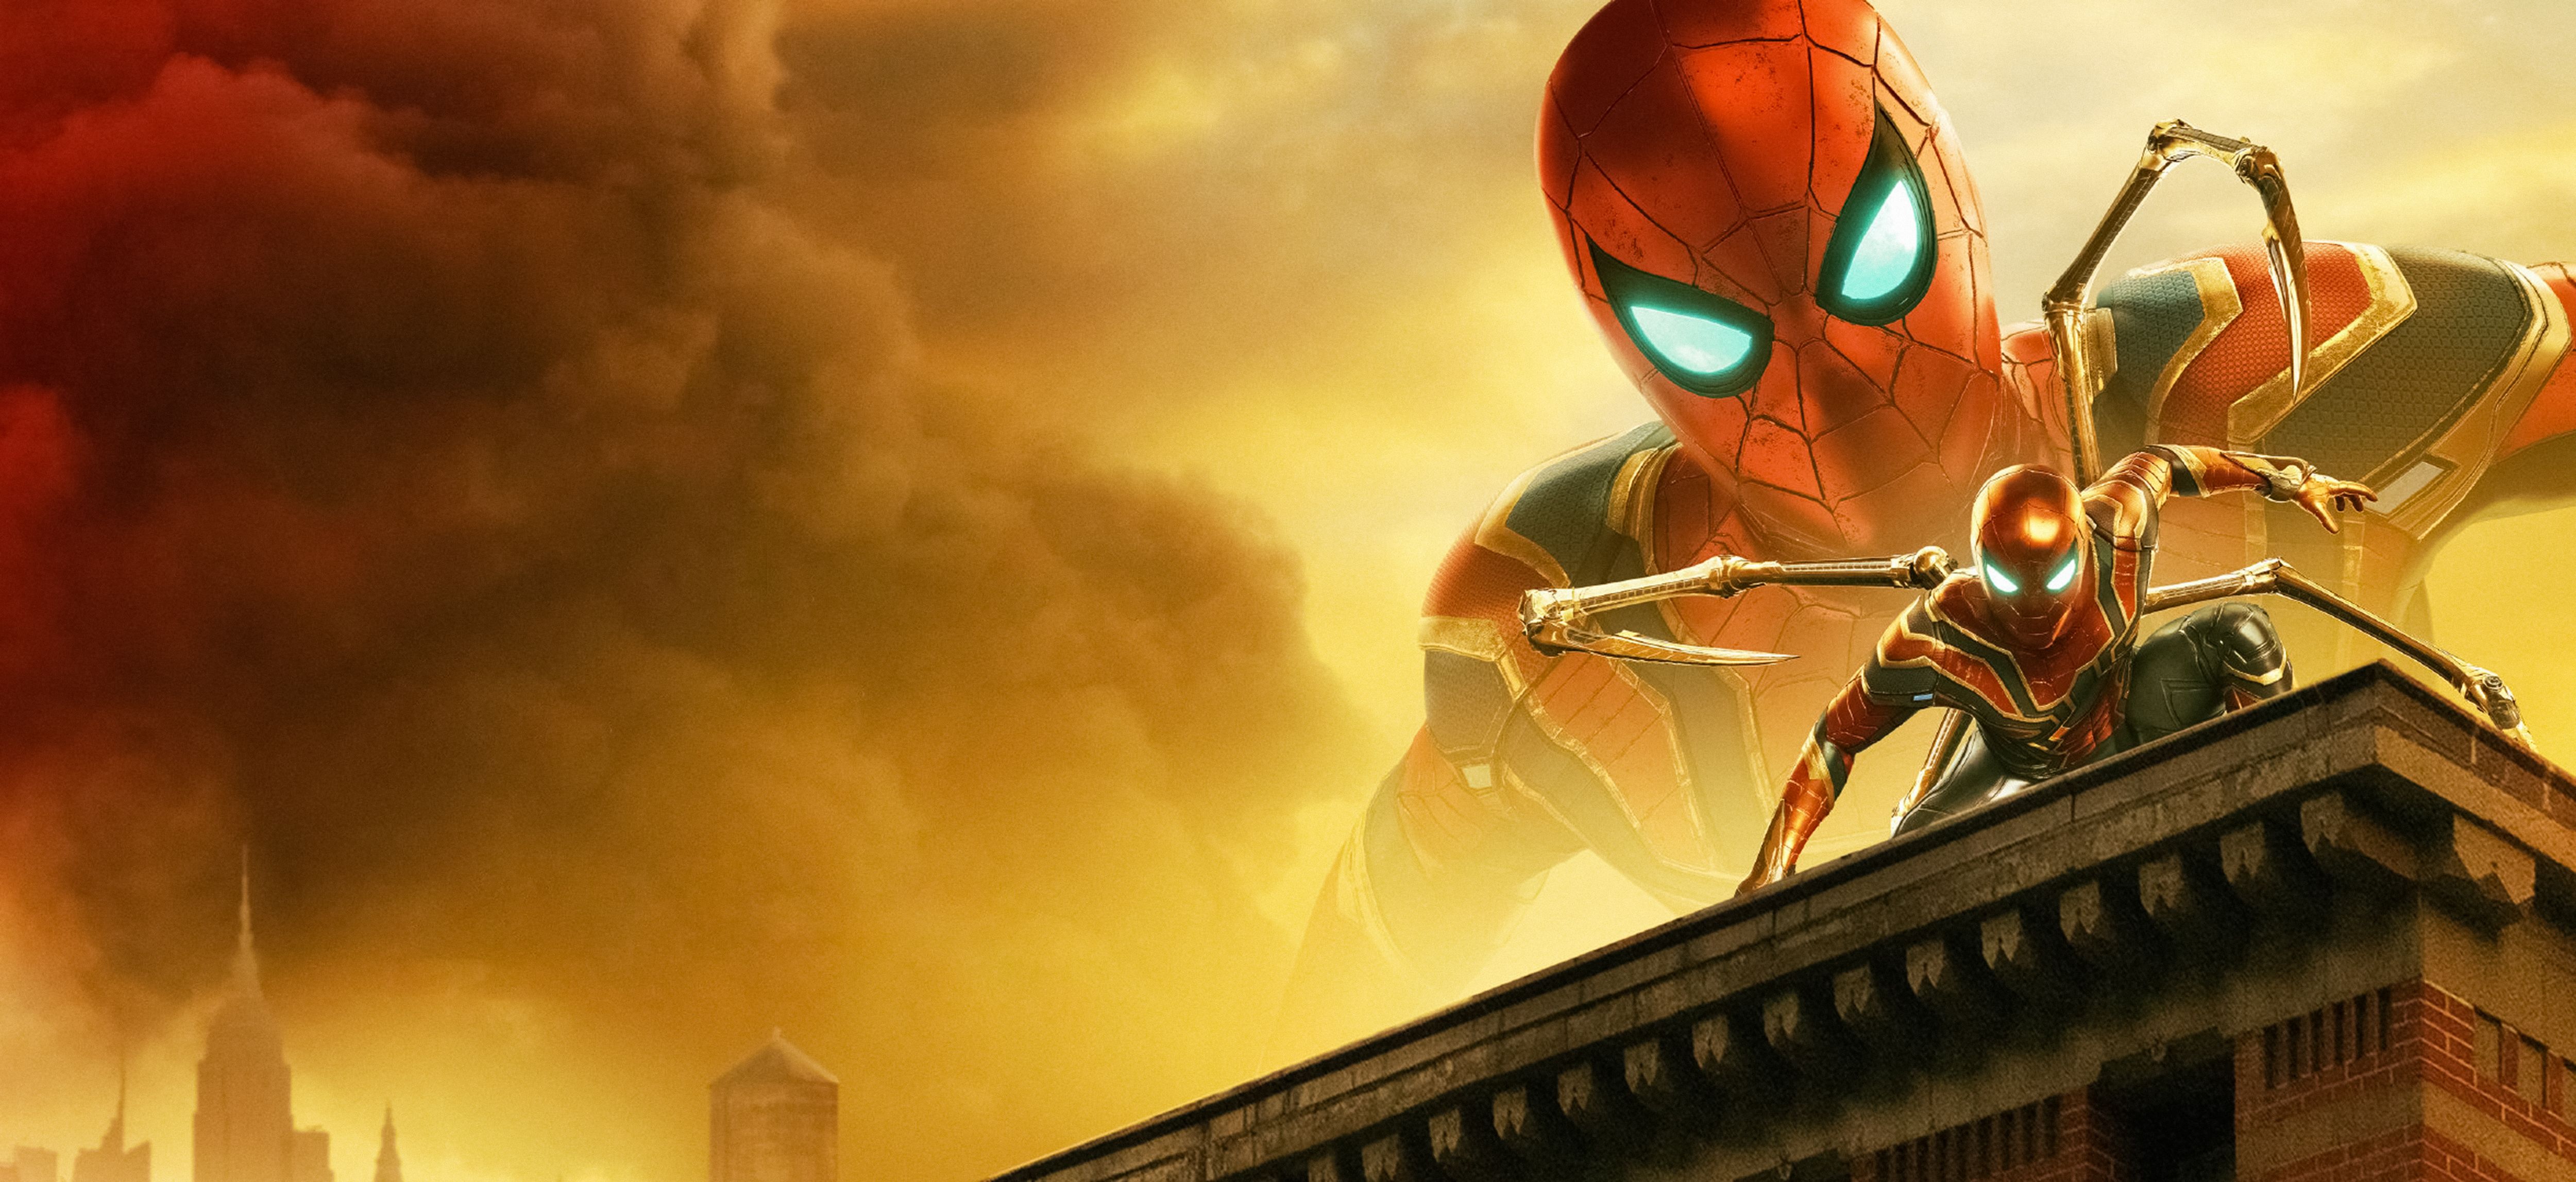 Spider Man: Far From Home 4K Wallpaper, Iron Spider, Movies